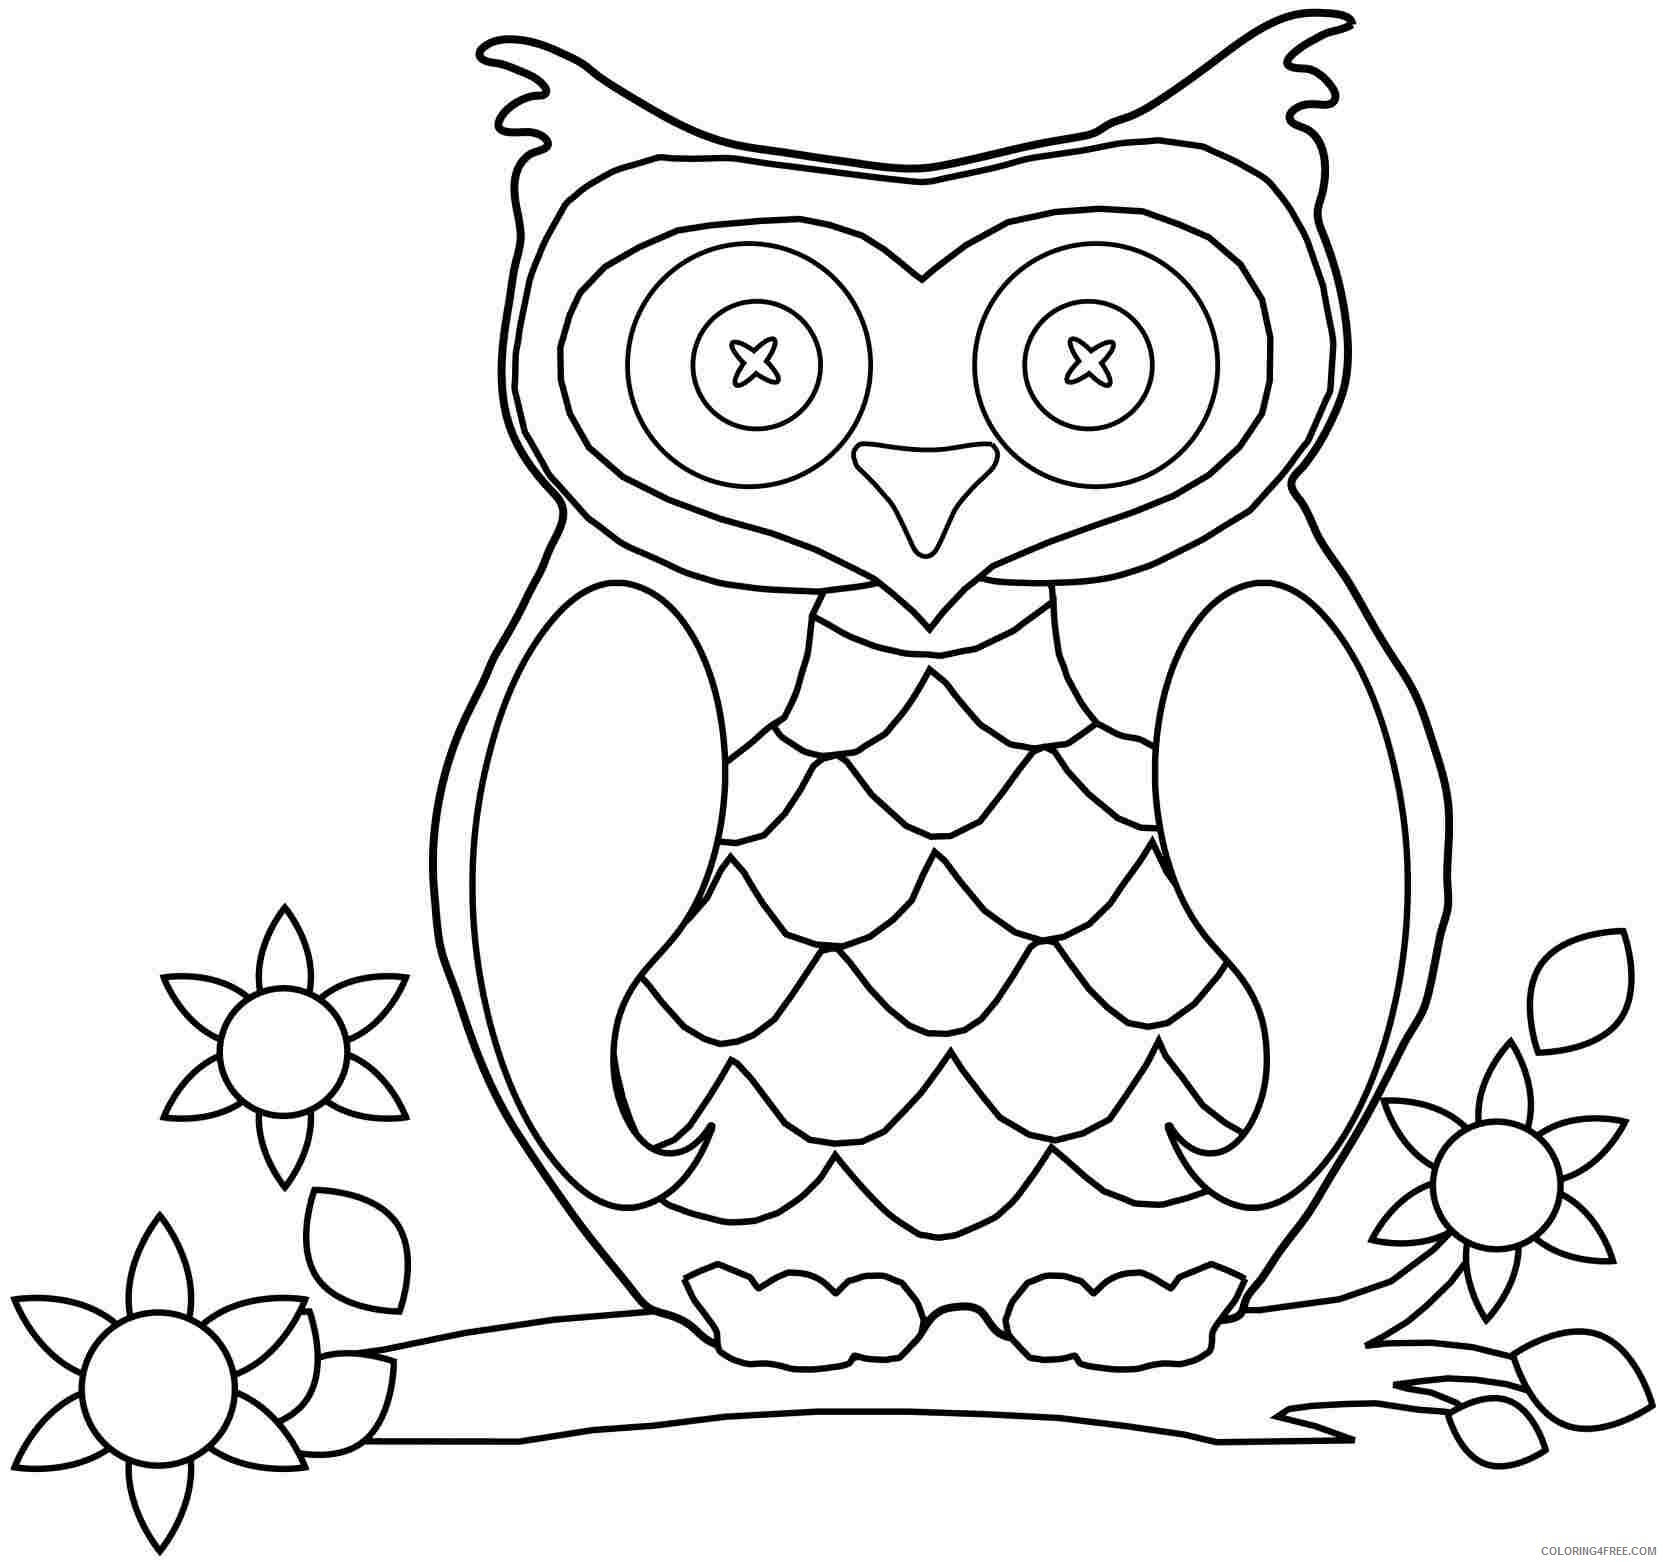 Owl Coloring Sheets Animal Coloring Pages Printable 2021 3038 Coloring4free